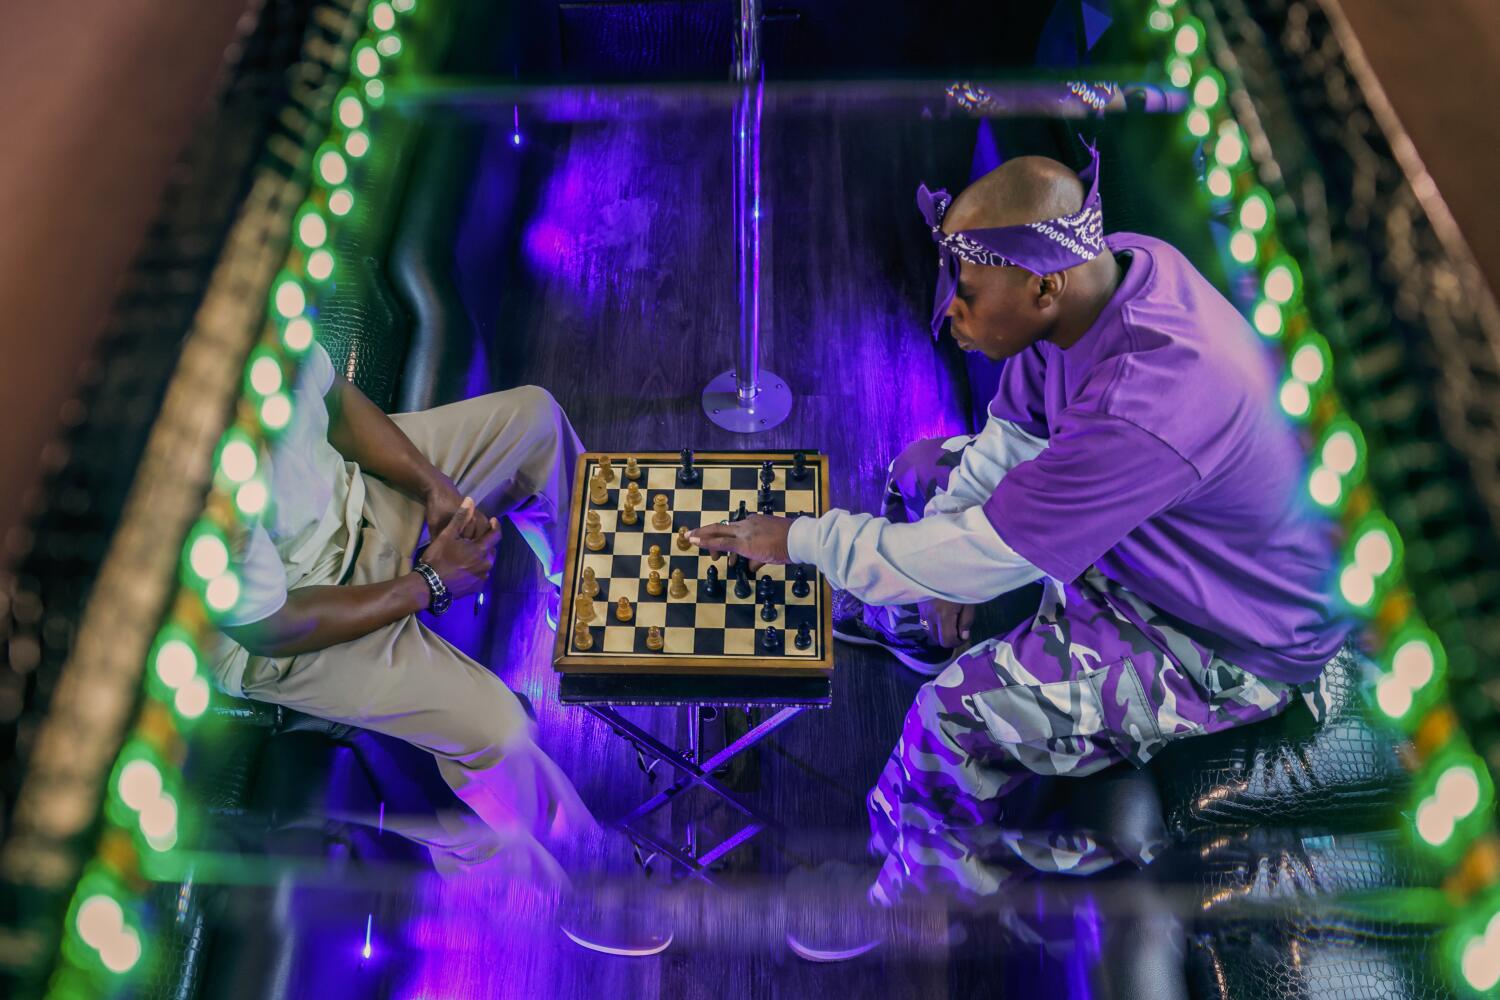 He turned his prison chess hobby into a wild street hustle. But can he beat the elites?